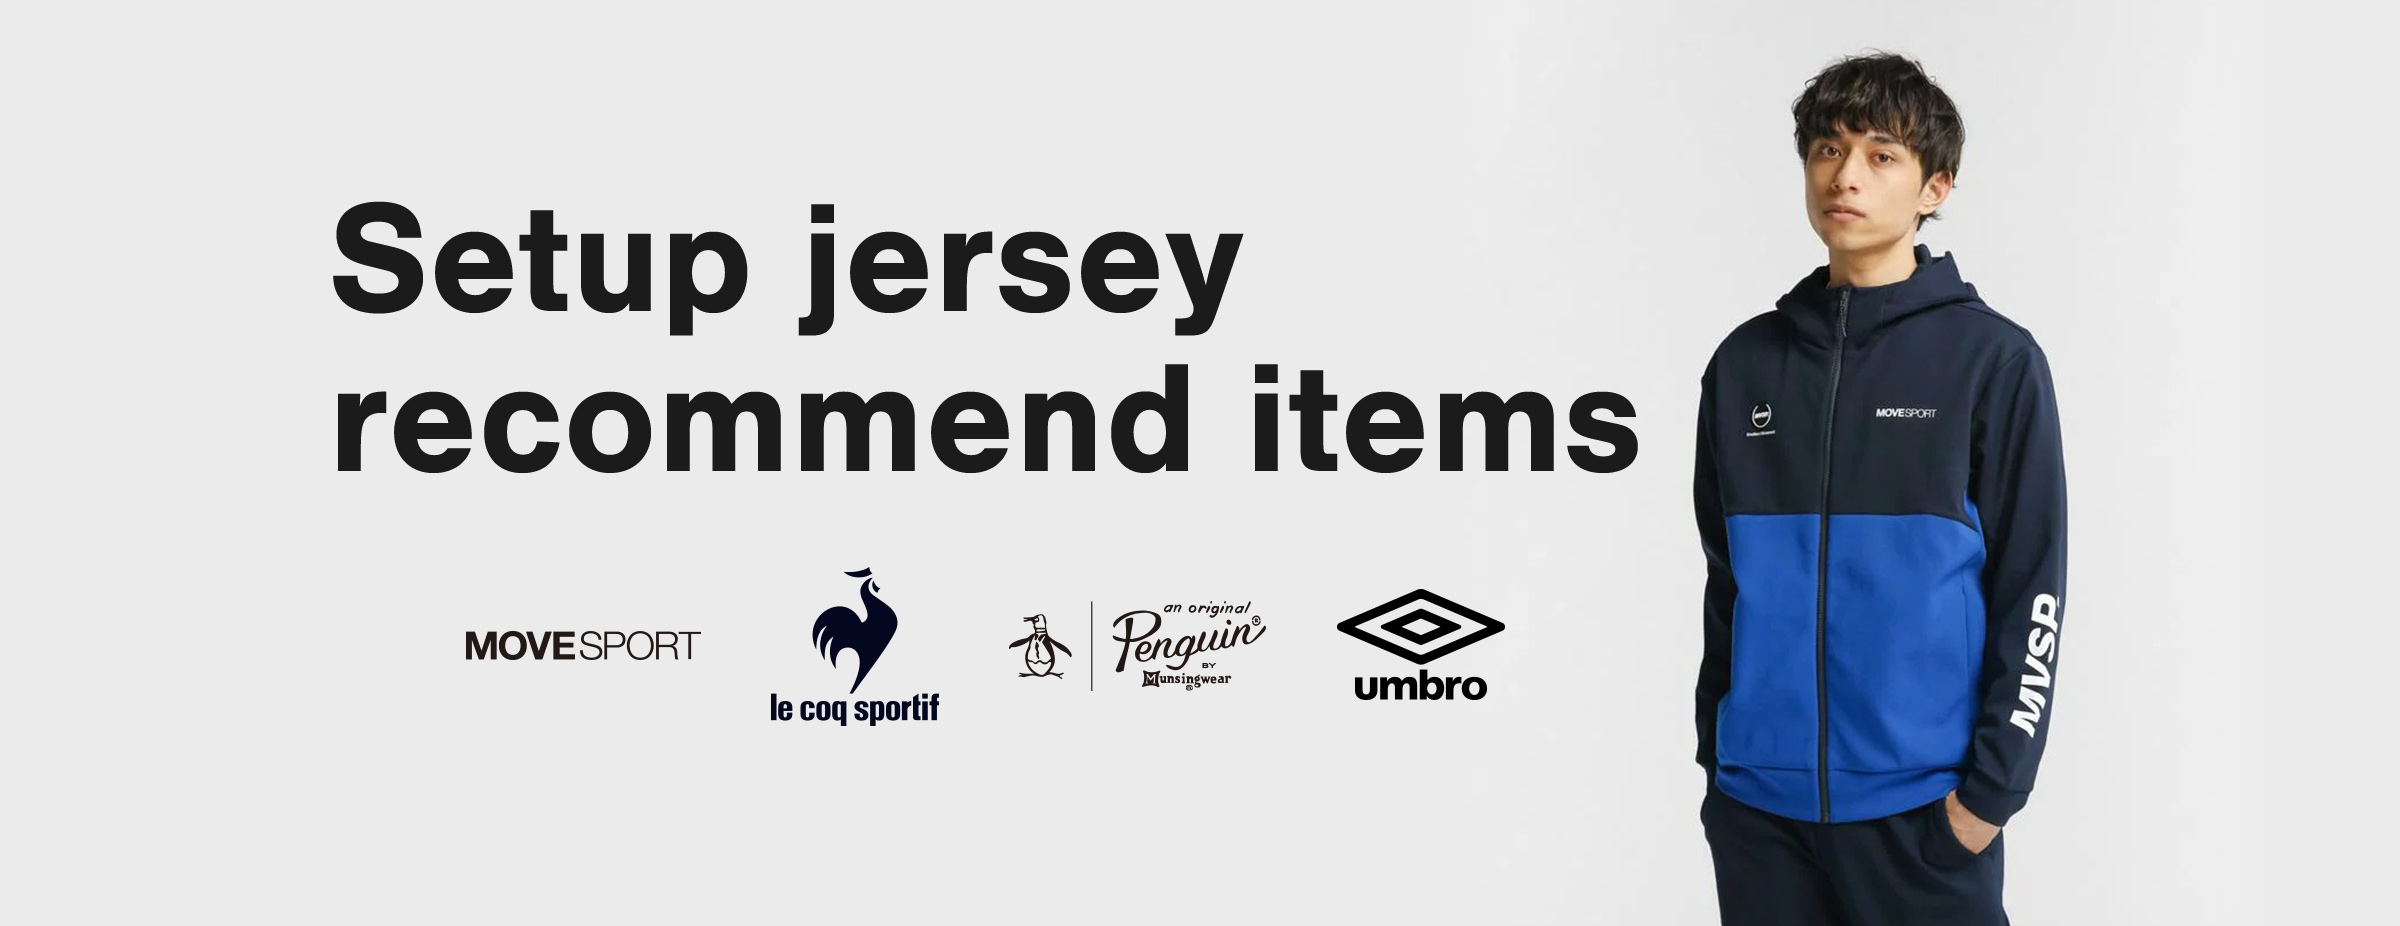 Setup jersey recommend items